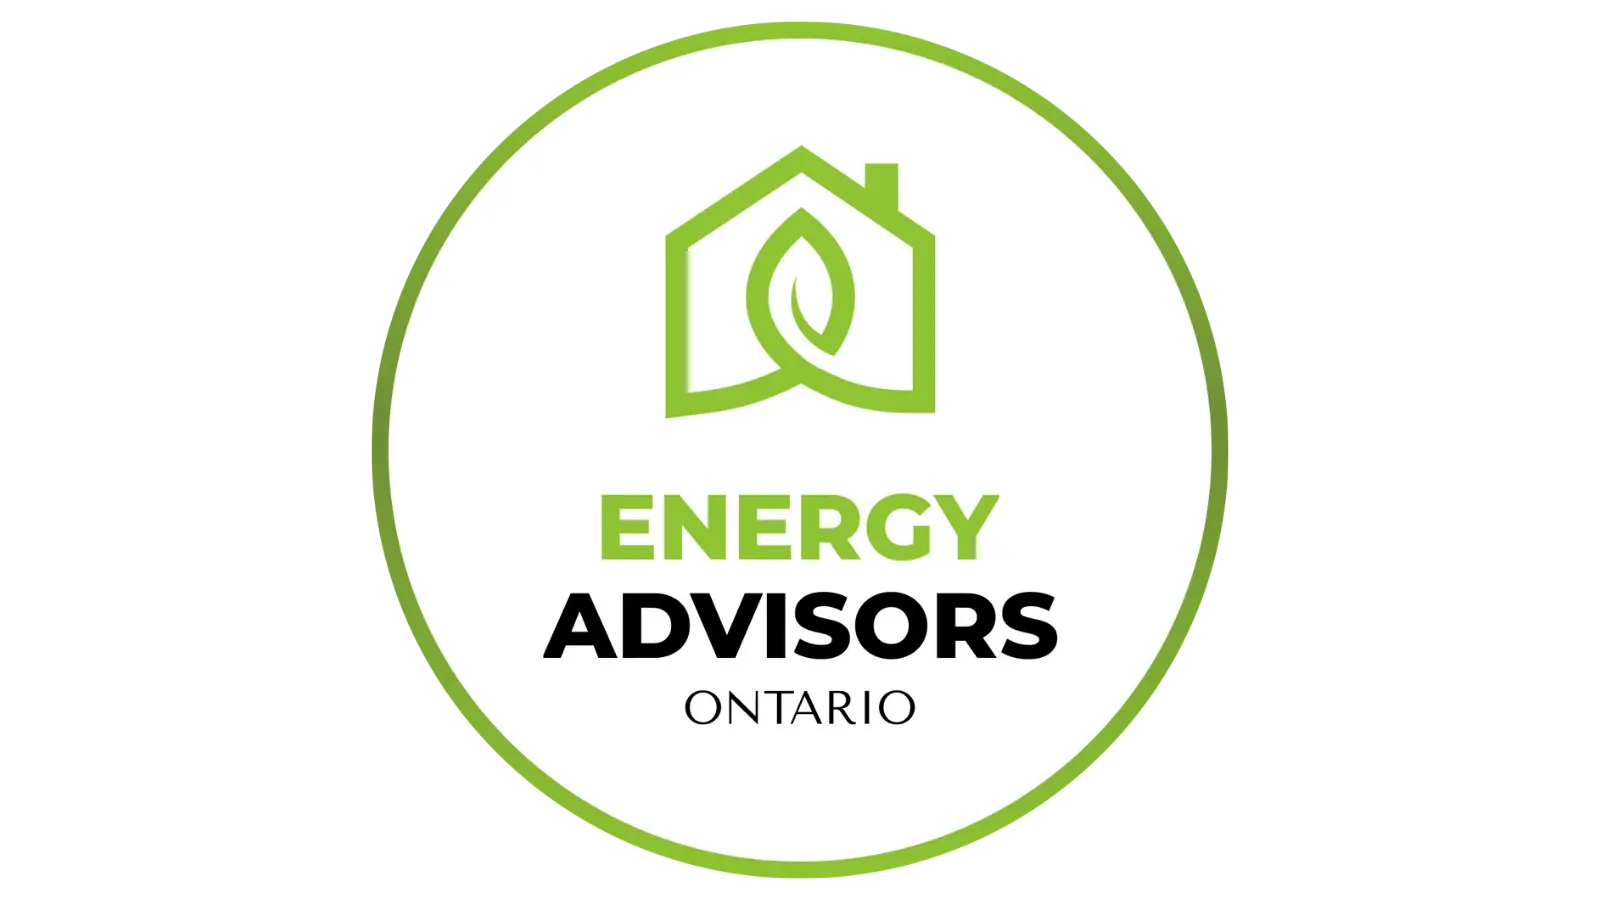 home energy auditor price - How much does a home energy audit cost in Ontario